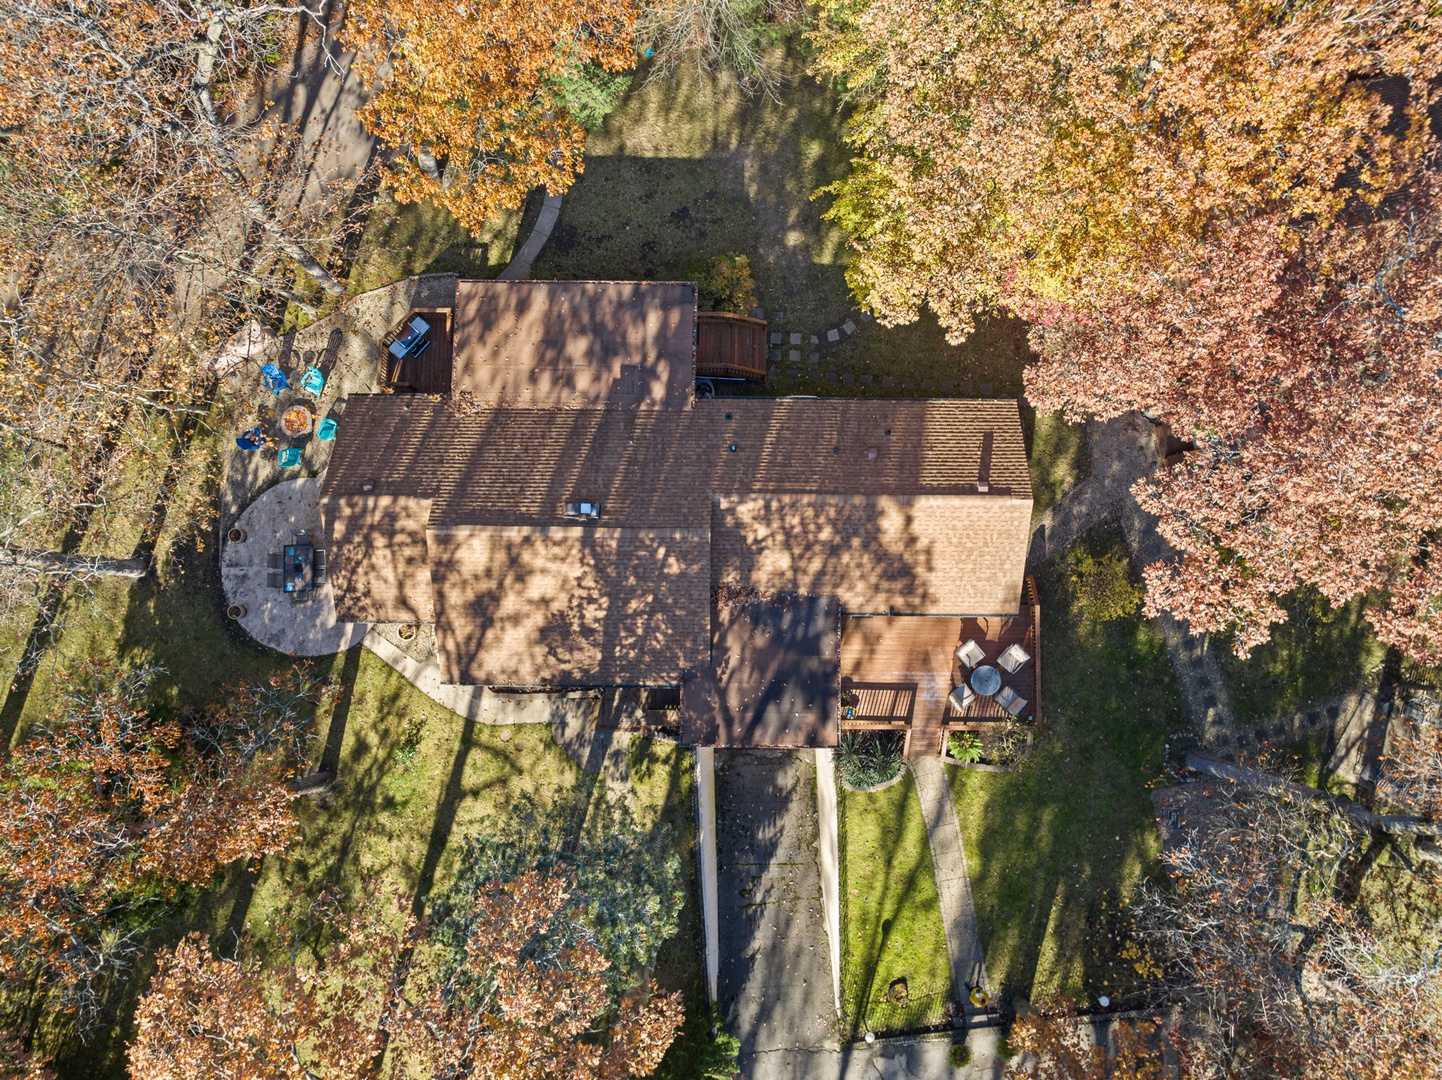 A nice bird’s-eye view of the property.